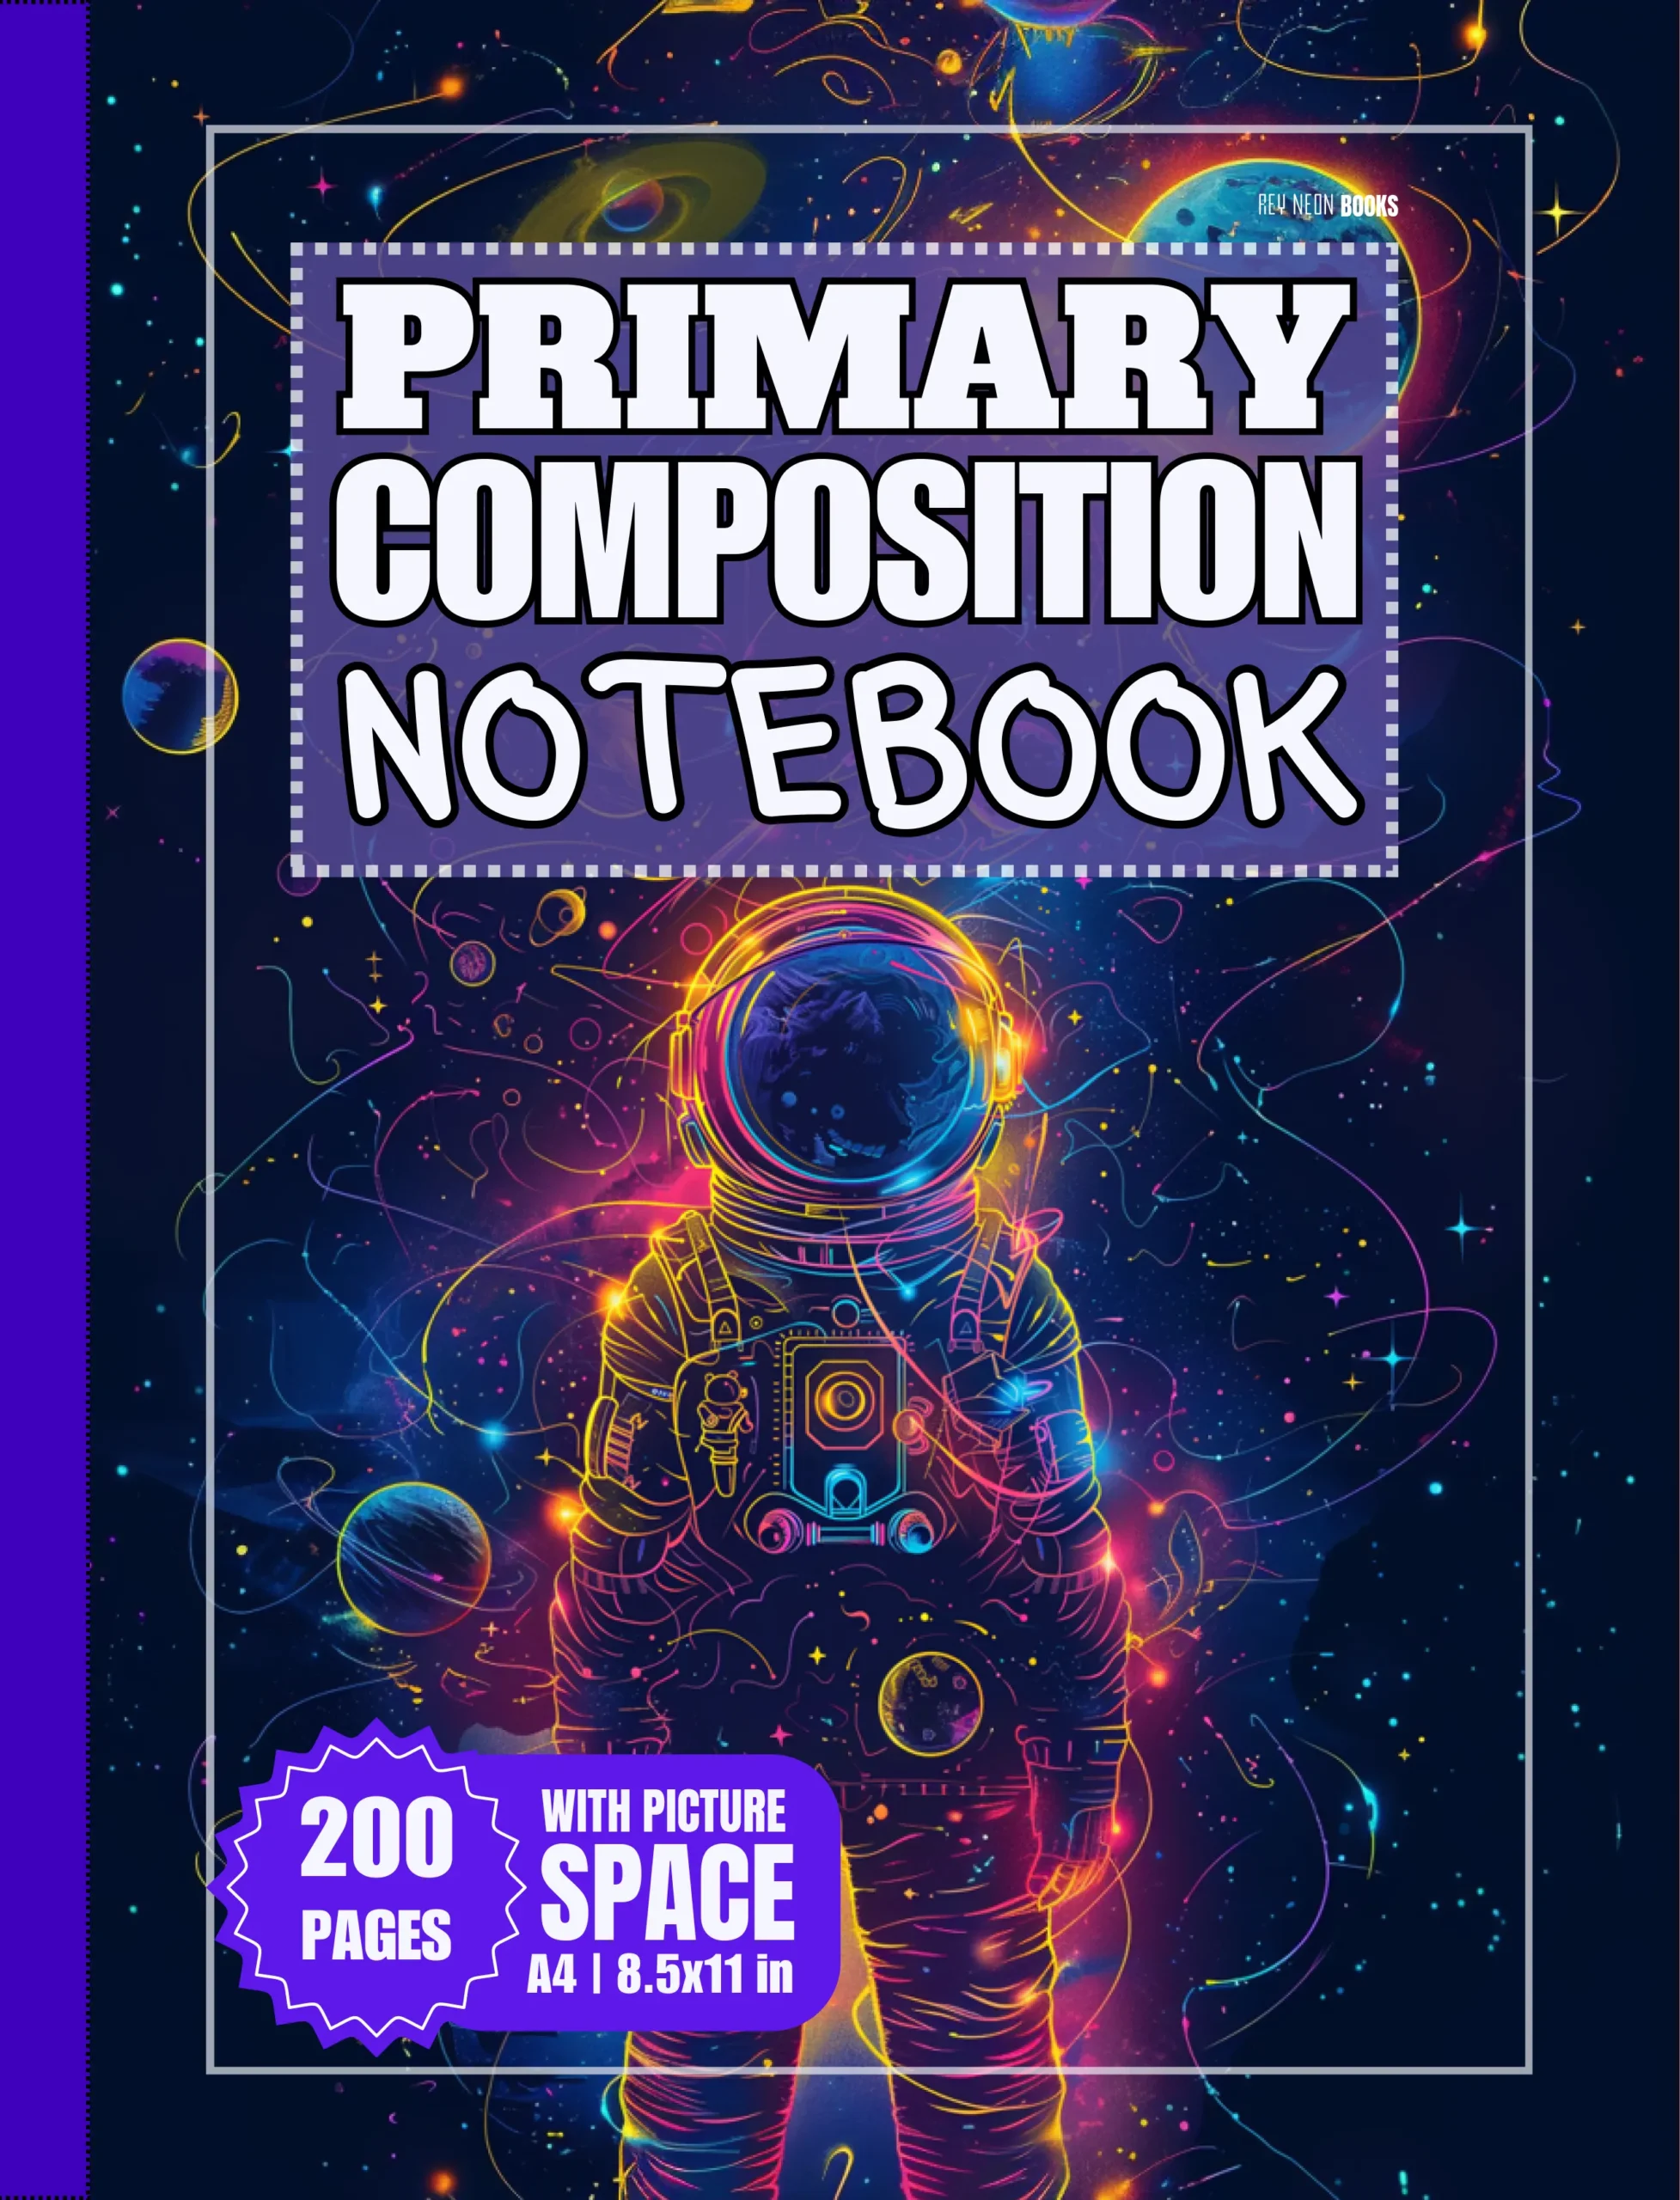 Primary composition notebook with picture space Cover